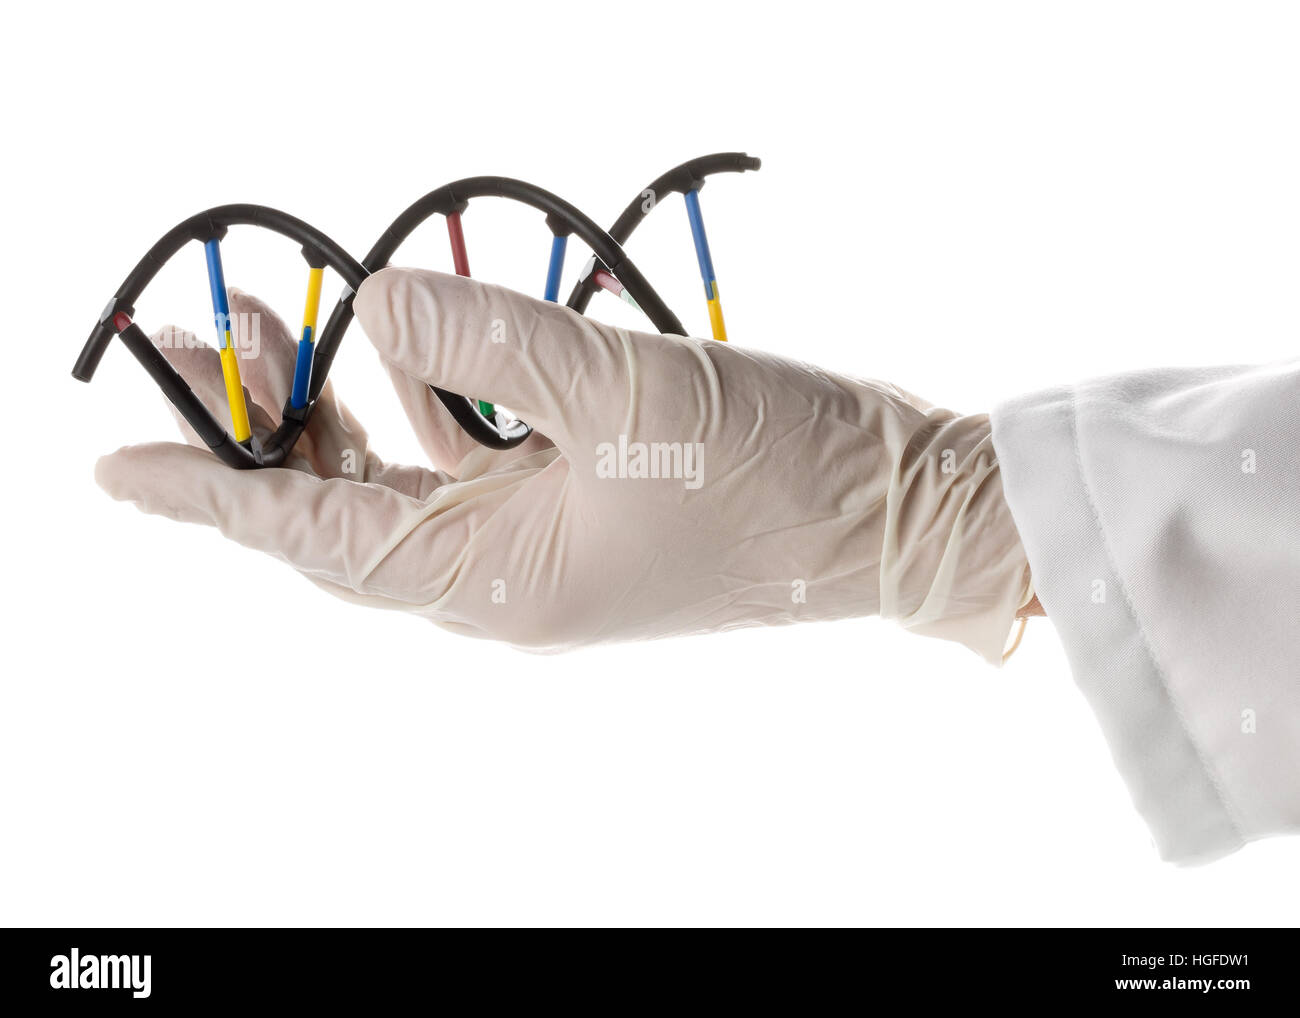 Researcher with glove holding DNA molecule model isolated on white background Stock Photo